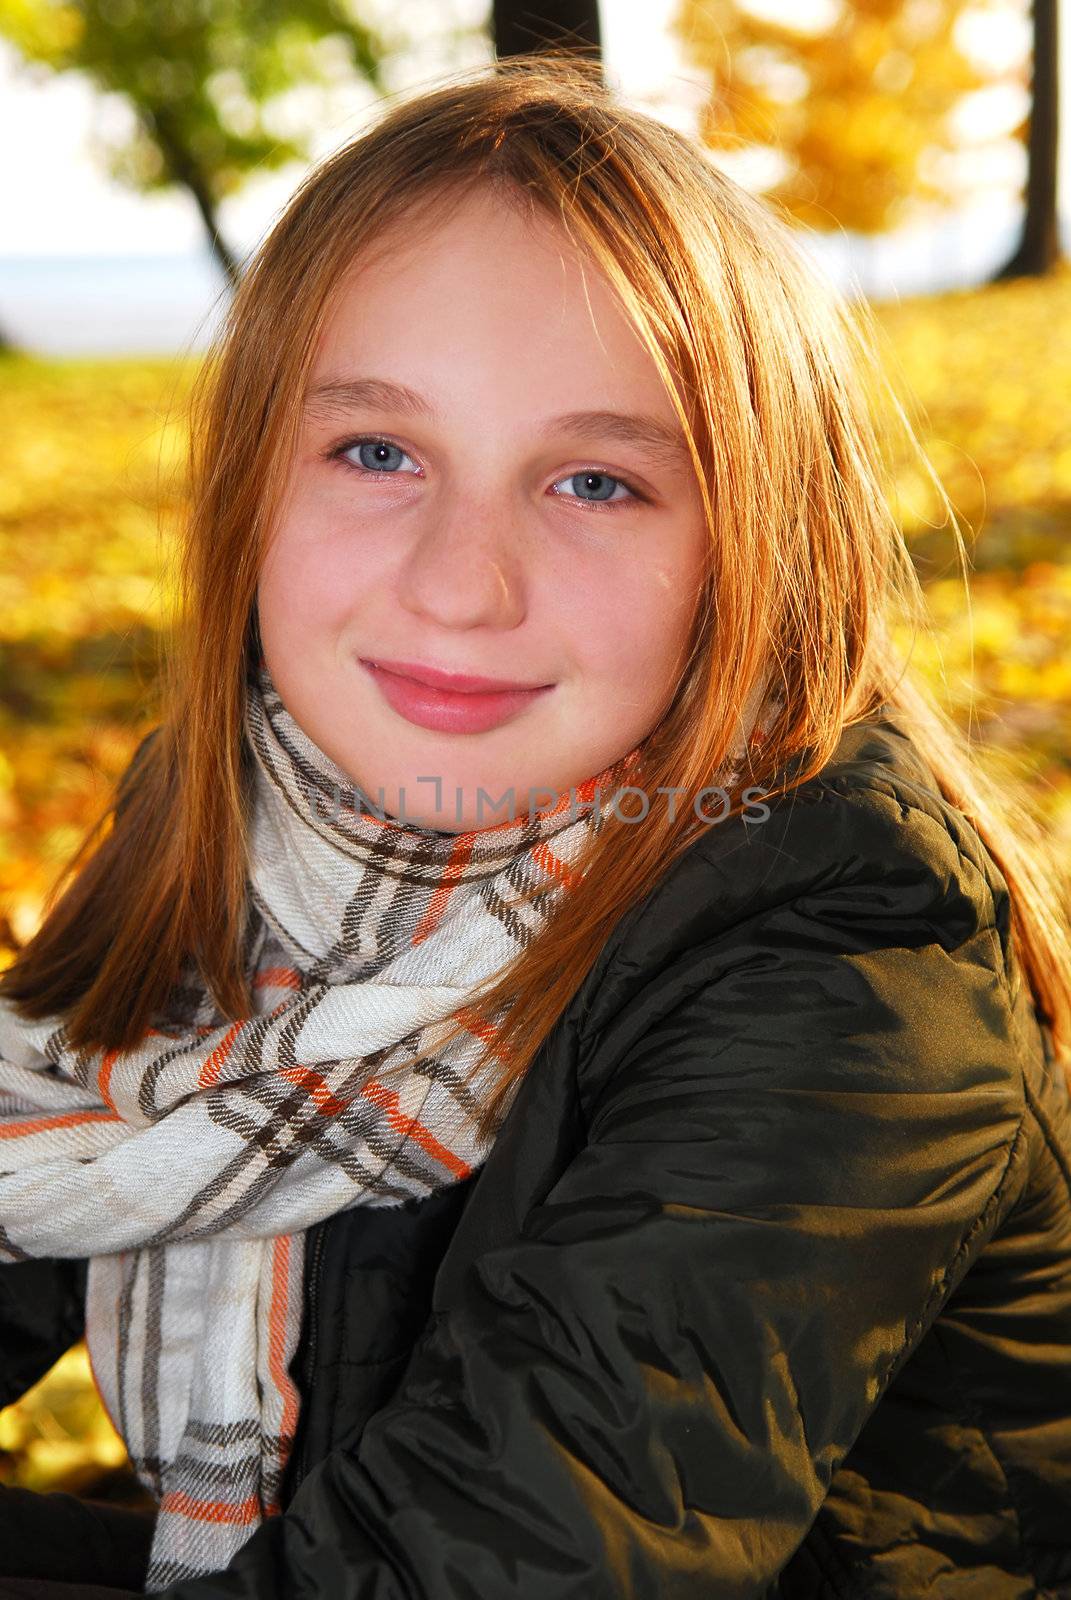 Portrait of a beautiful teenage girl in a fall park with fallen leaves